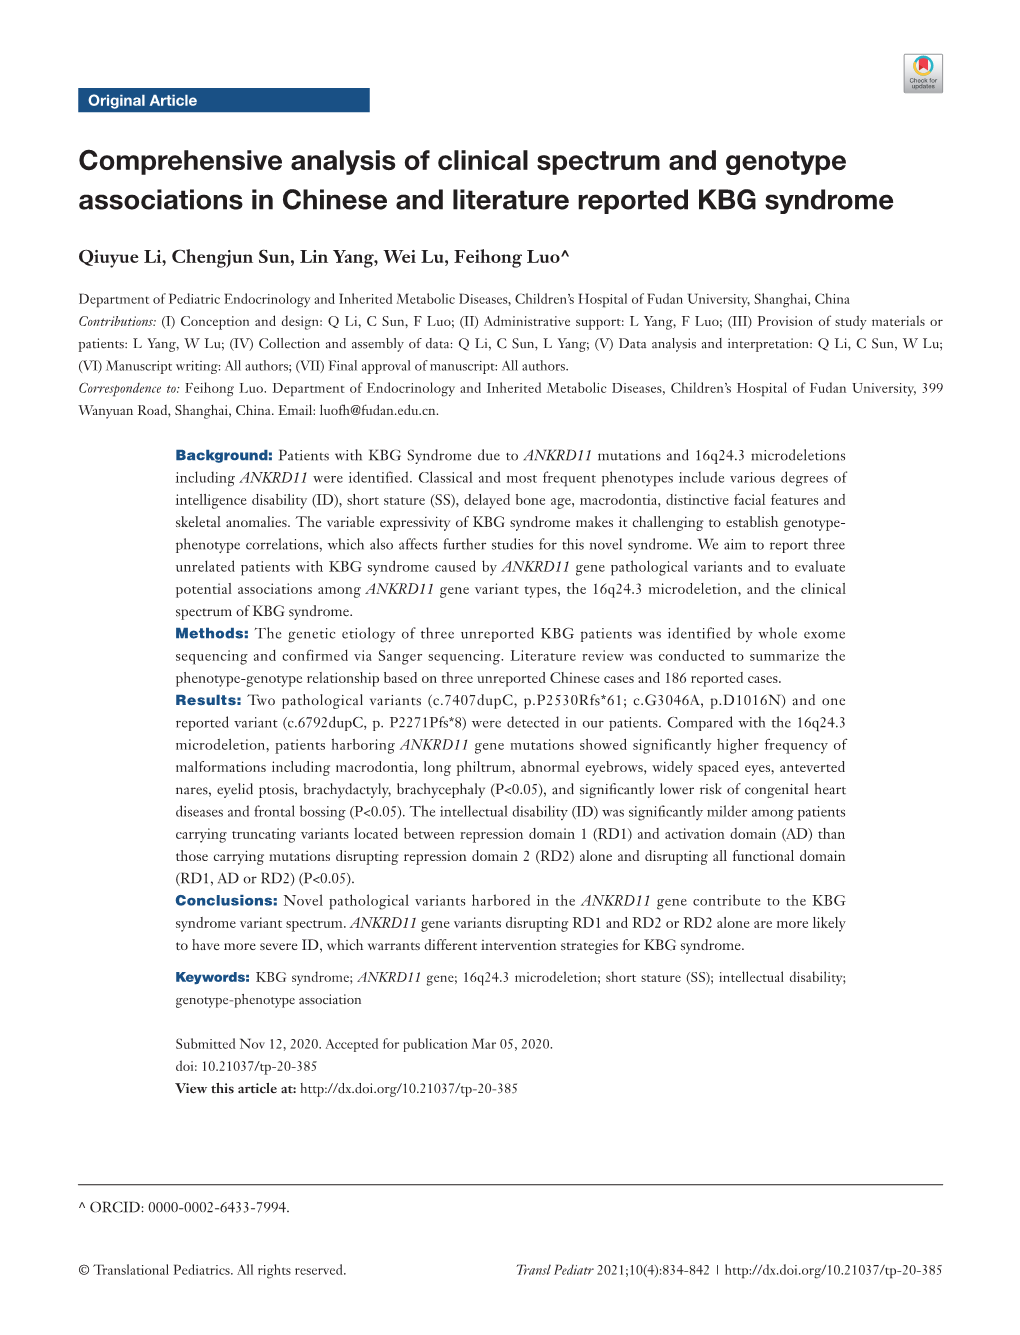 Comprehensive Analysis of Clinical Spectrum and Genotype Associations in Chinese and Literature Reported KBG Syndrome